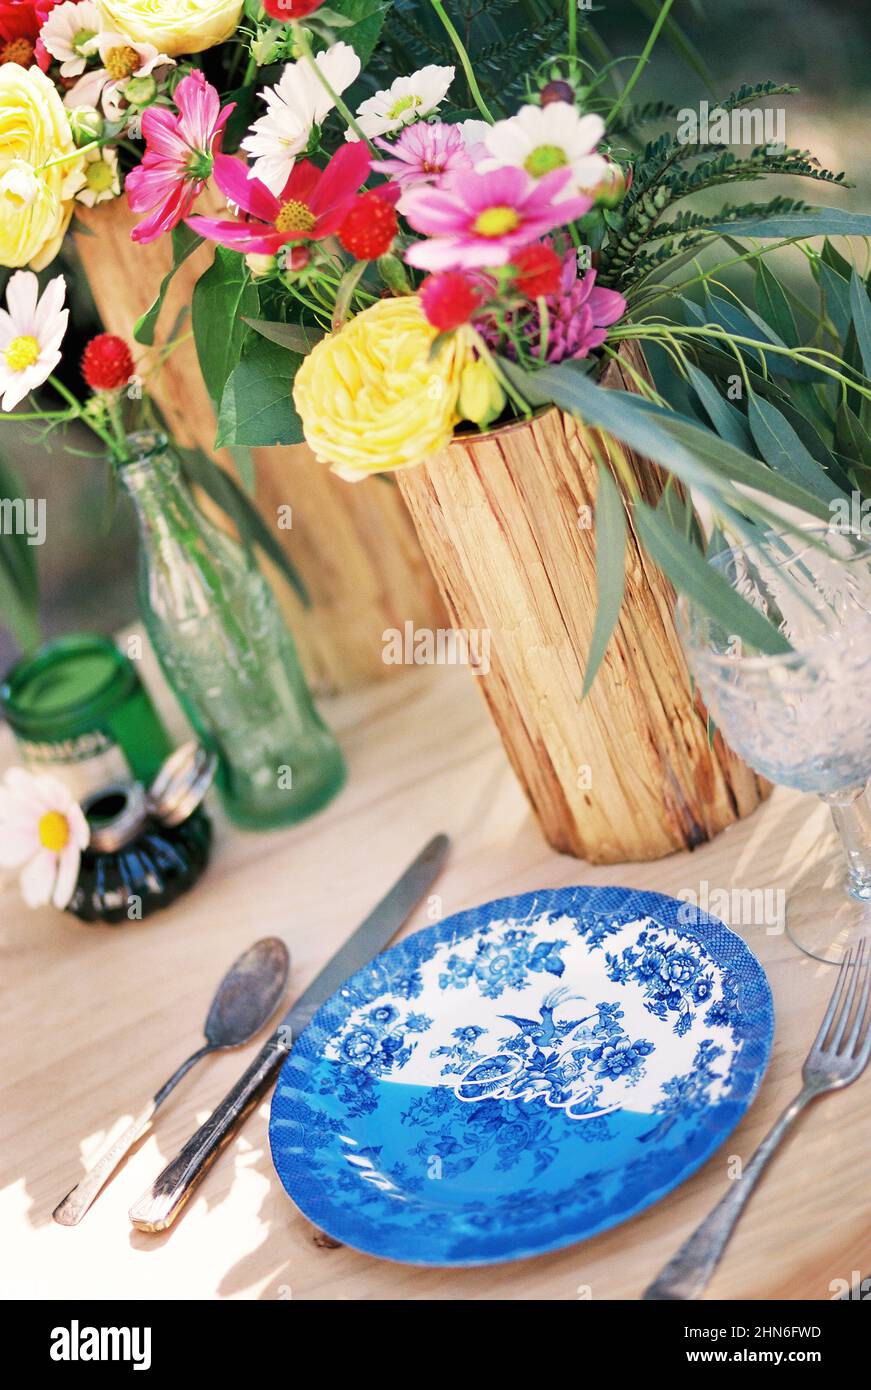 Table Setting with Antique Plate and Cutlery and Fresh Flowers Stock Photo